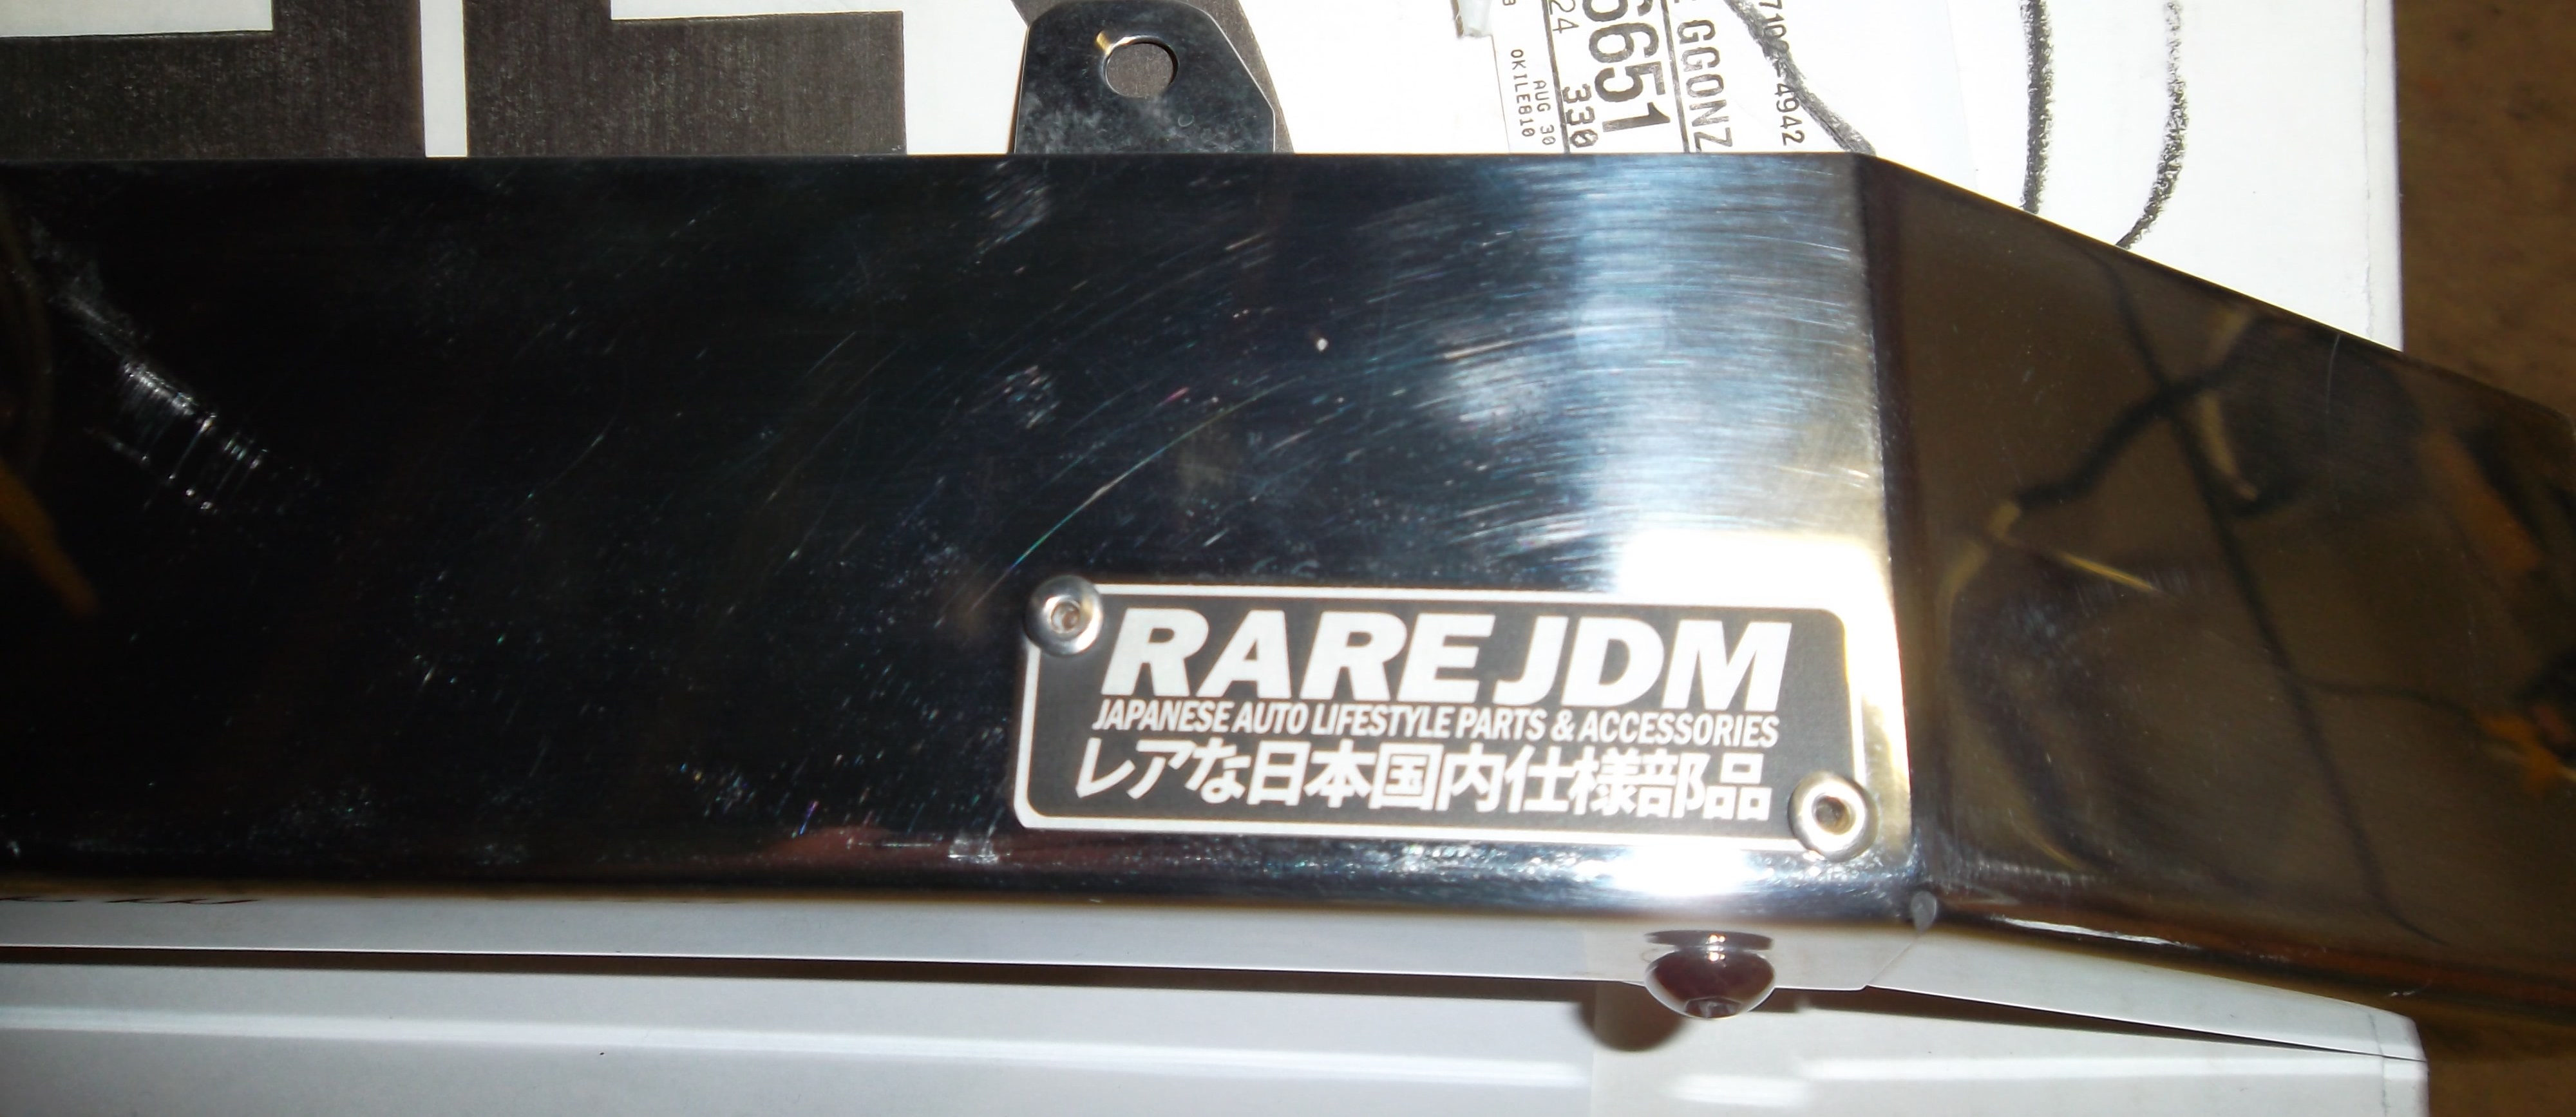 [FS] Rare JDM harness cover Polished Nissan 350Z and 370Z Forum Discussion